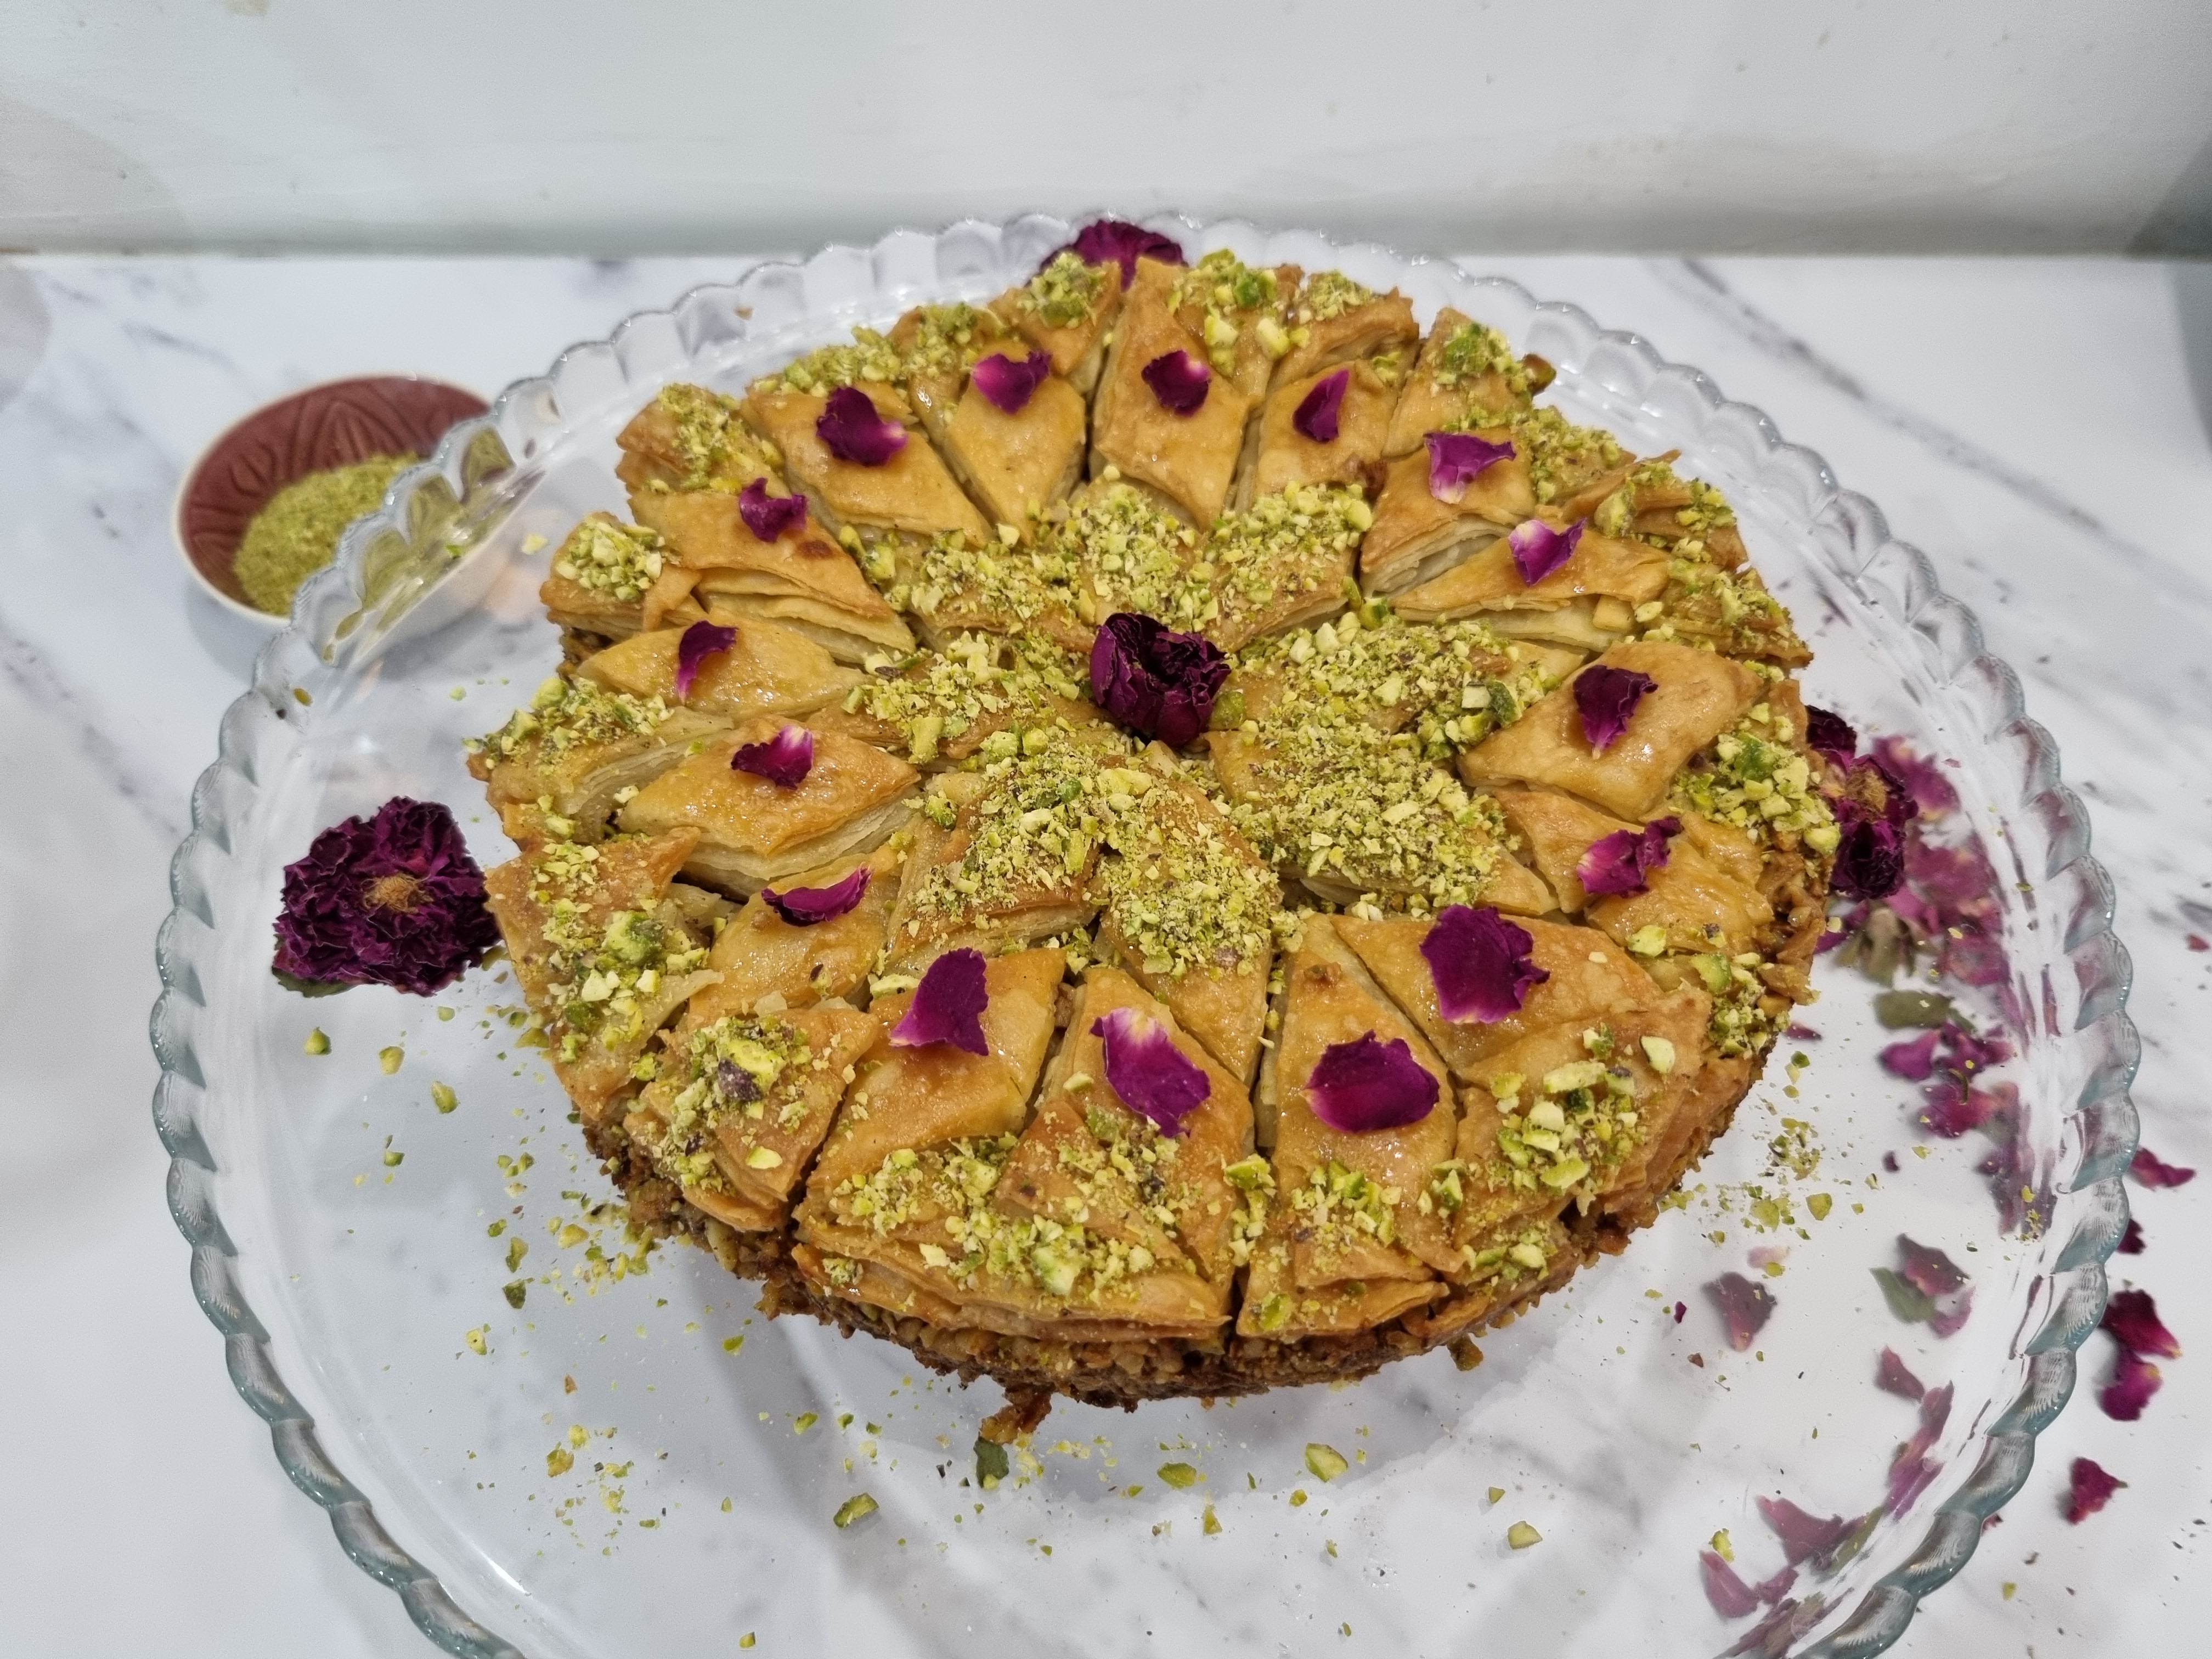 Finished picture of homemade baklava with pistachios and rose petals